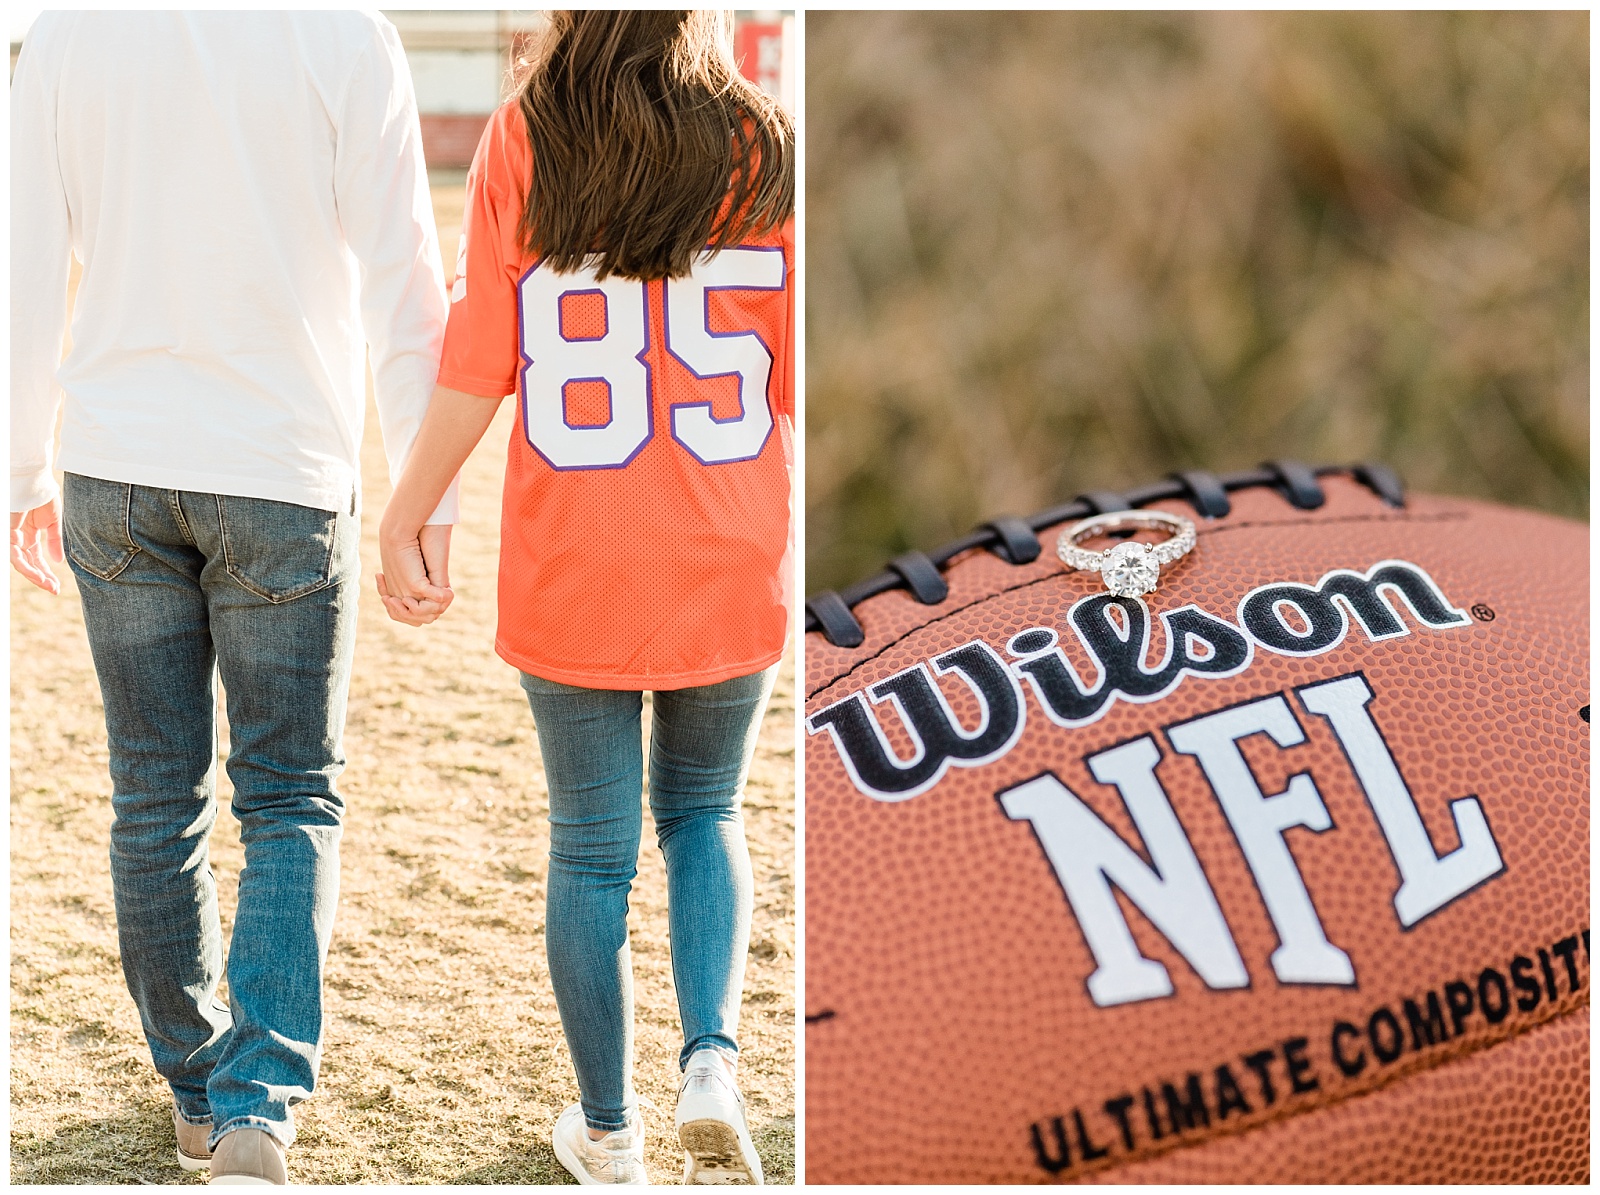 New Jersey, Engagement Session, Wedding Photographer, NFL, Coach, LA Chargers, Football, Athletic, Sporty, Jersey, Engagement Ring